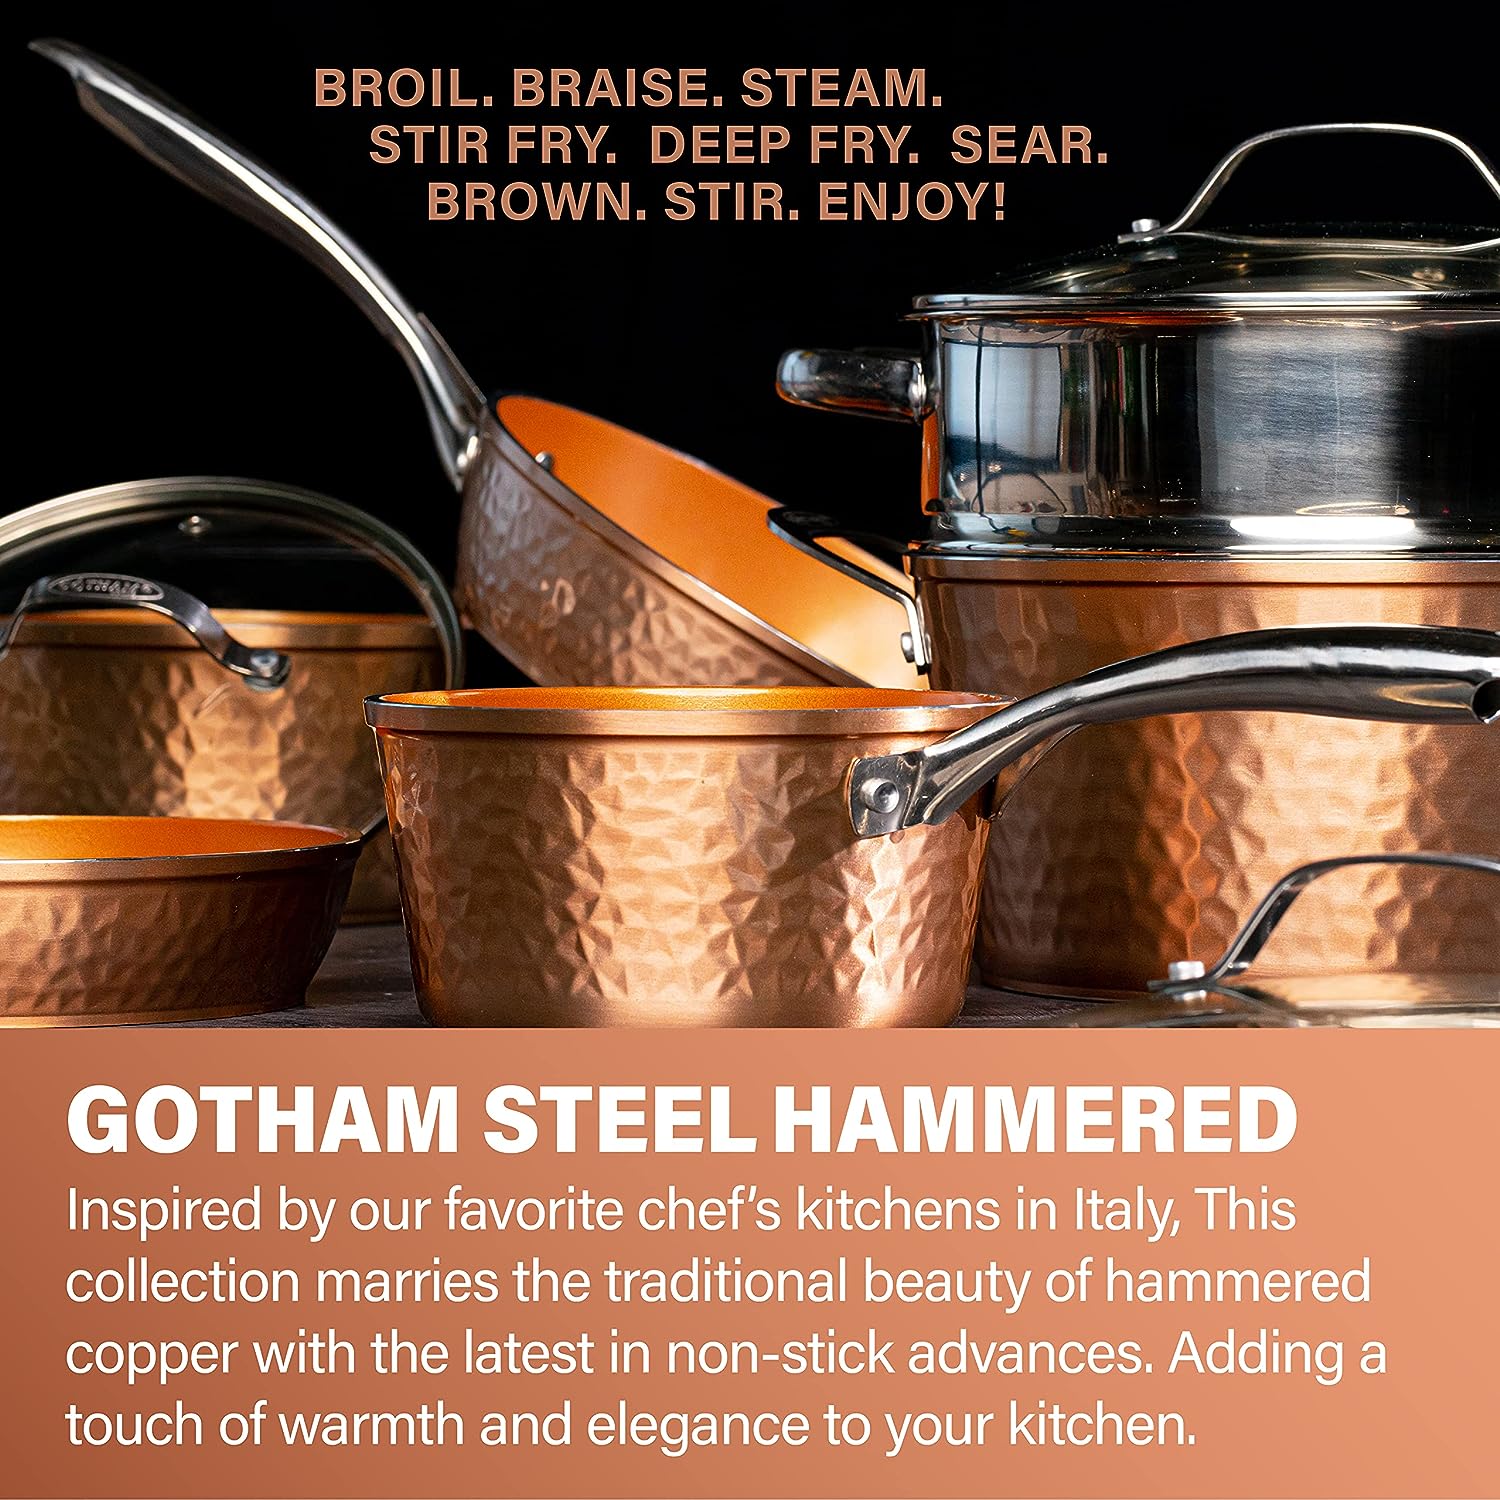 Gotham Steel Hammered 12 Inch Non Stick Frying Pan with Lid – Copper Nonstick Frying Pan, Premium Ceramic Cookware with Stay Cool Handles and Induction Plate for Even Heating, Dishwasher/Oven Safe